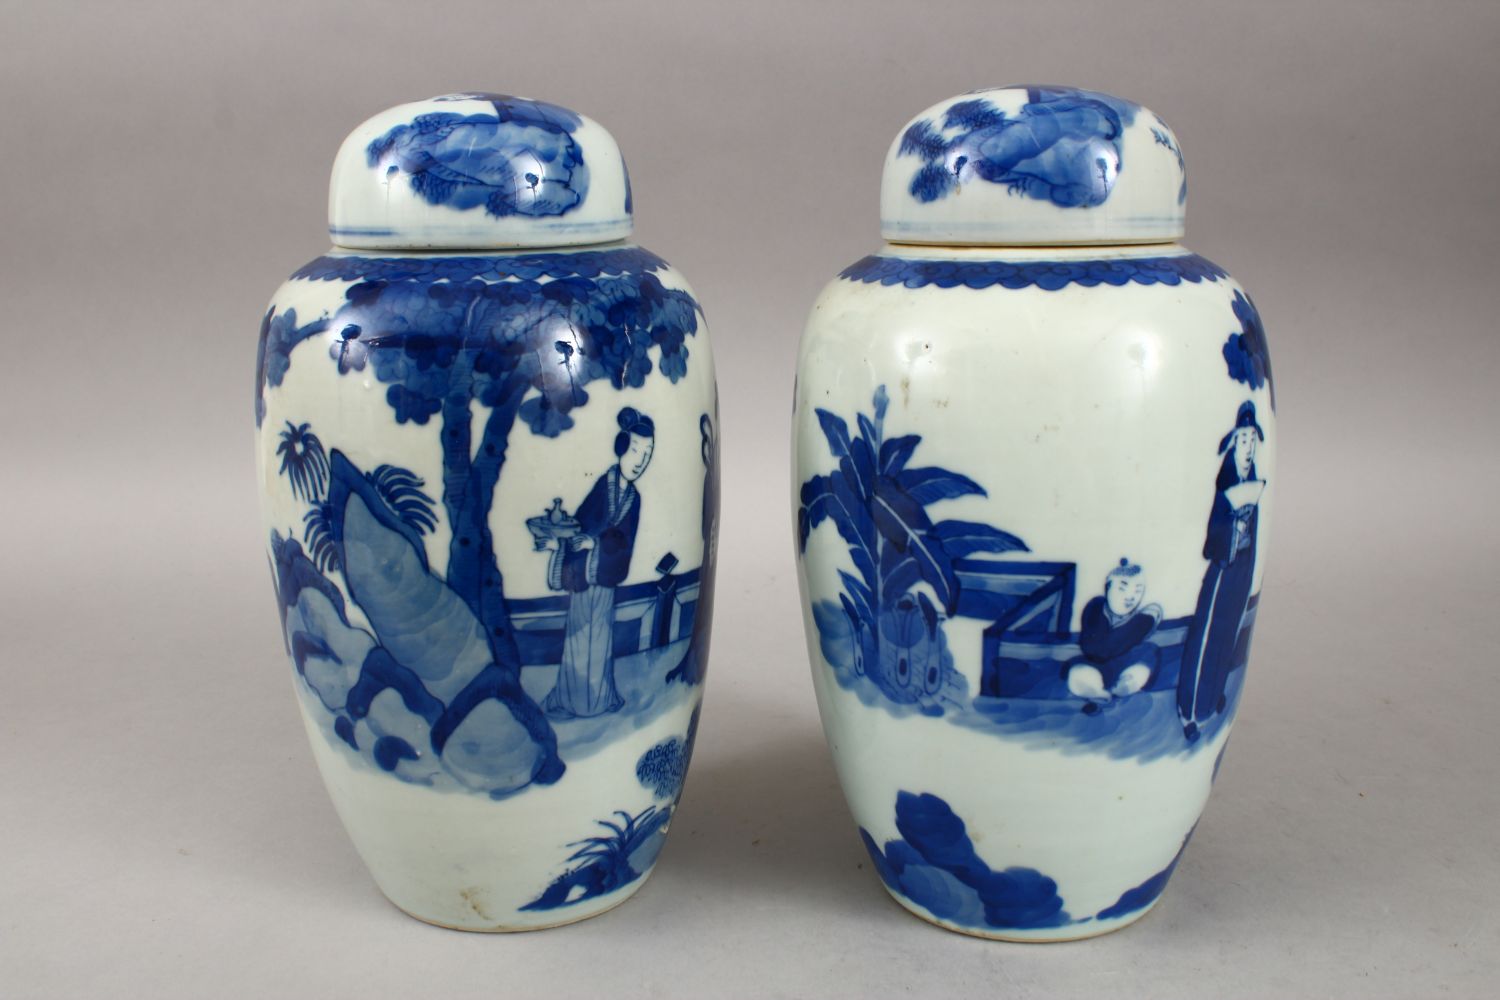 A PAIR OF 19TH CENTURY CHINESE BLUE & WHITE PORCELAIN JARS & COVERS, decorated with scenes of - Image 2 of 6